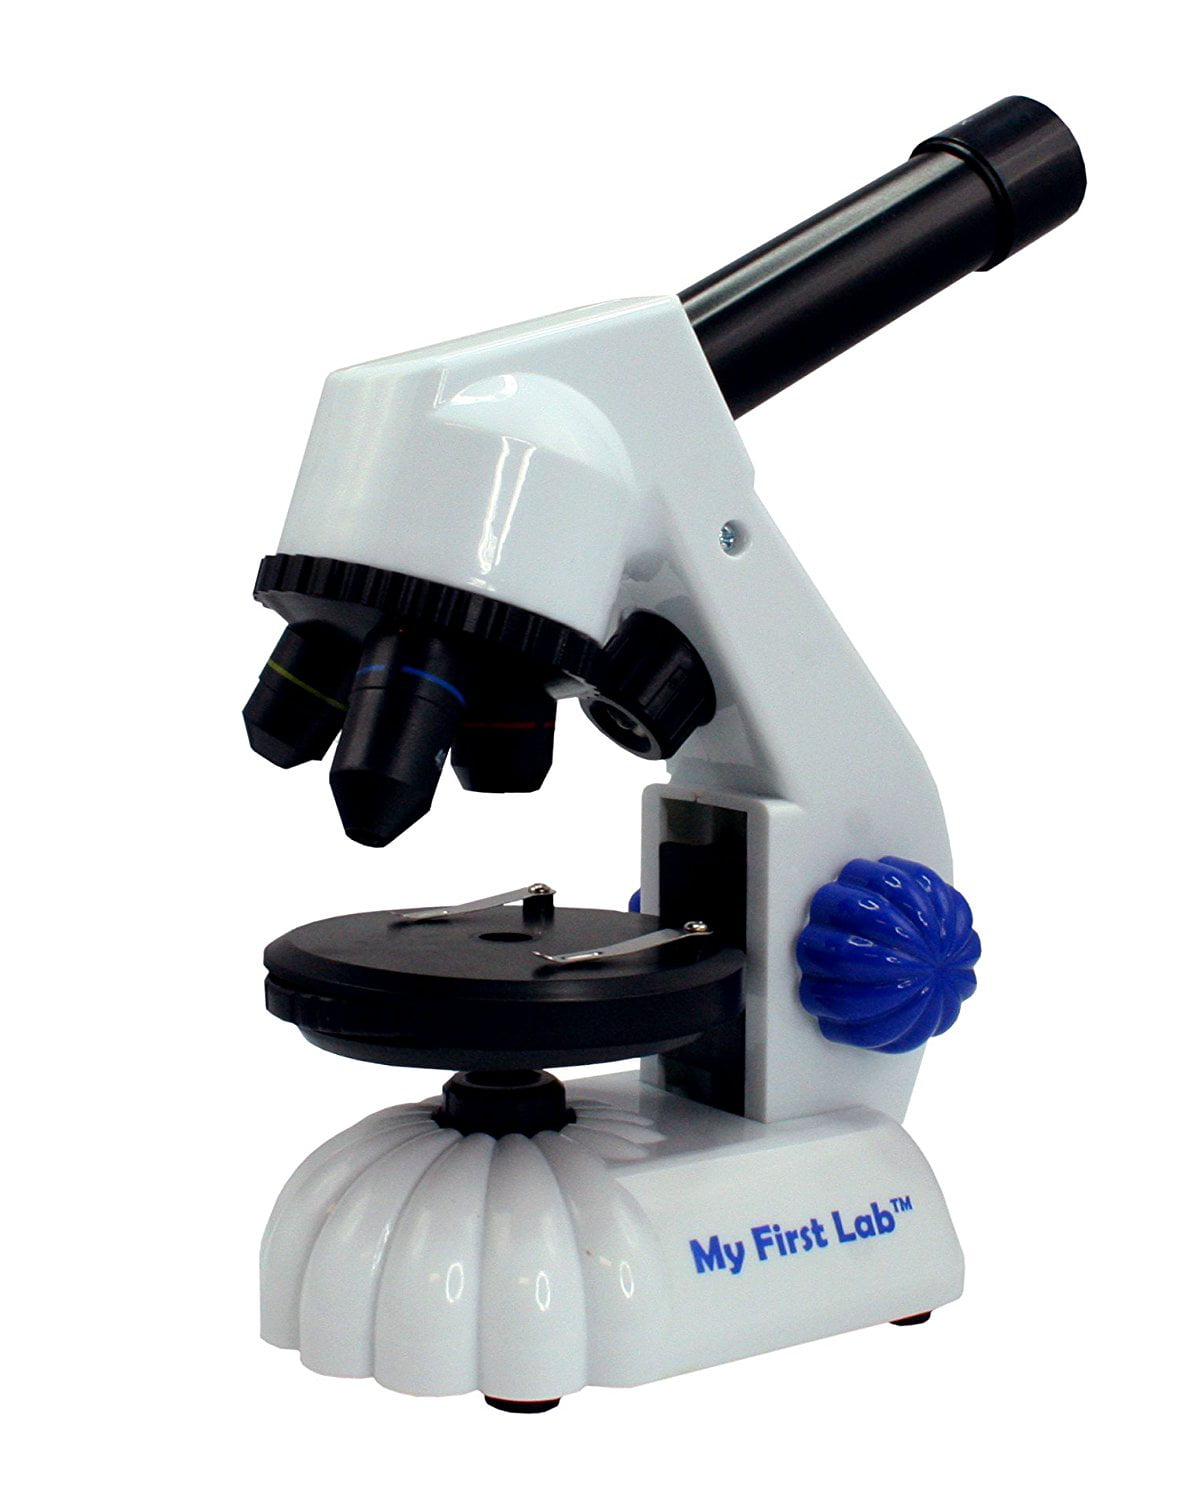 MFL-06 for sale online My First Lab Duo-Scope Microscope 